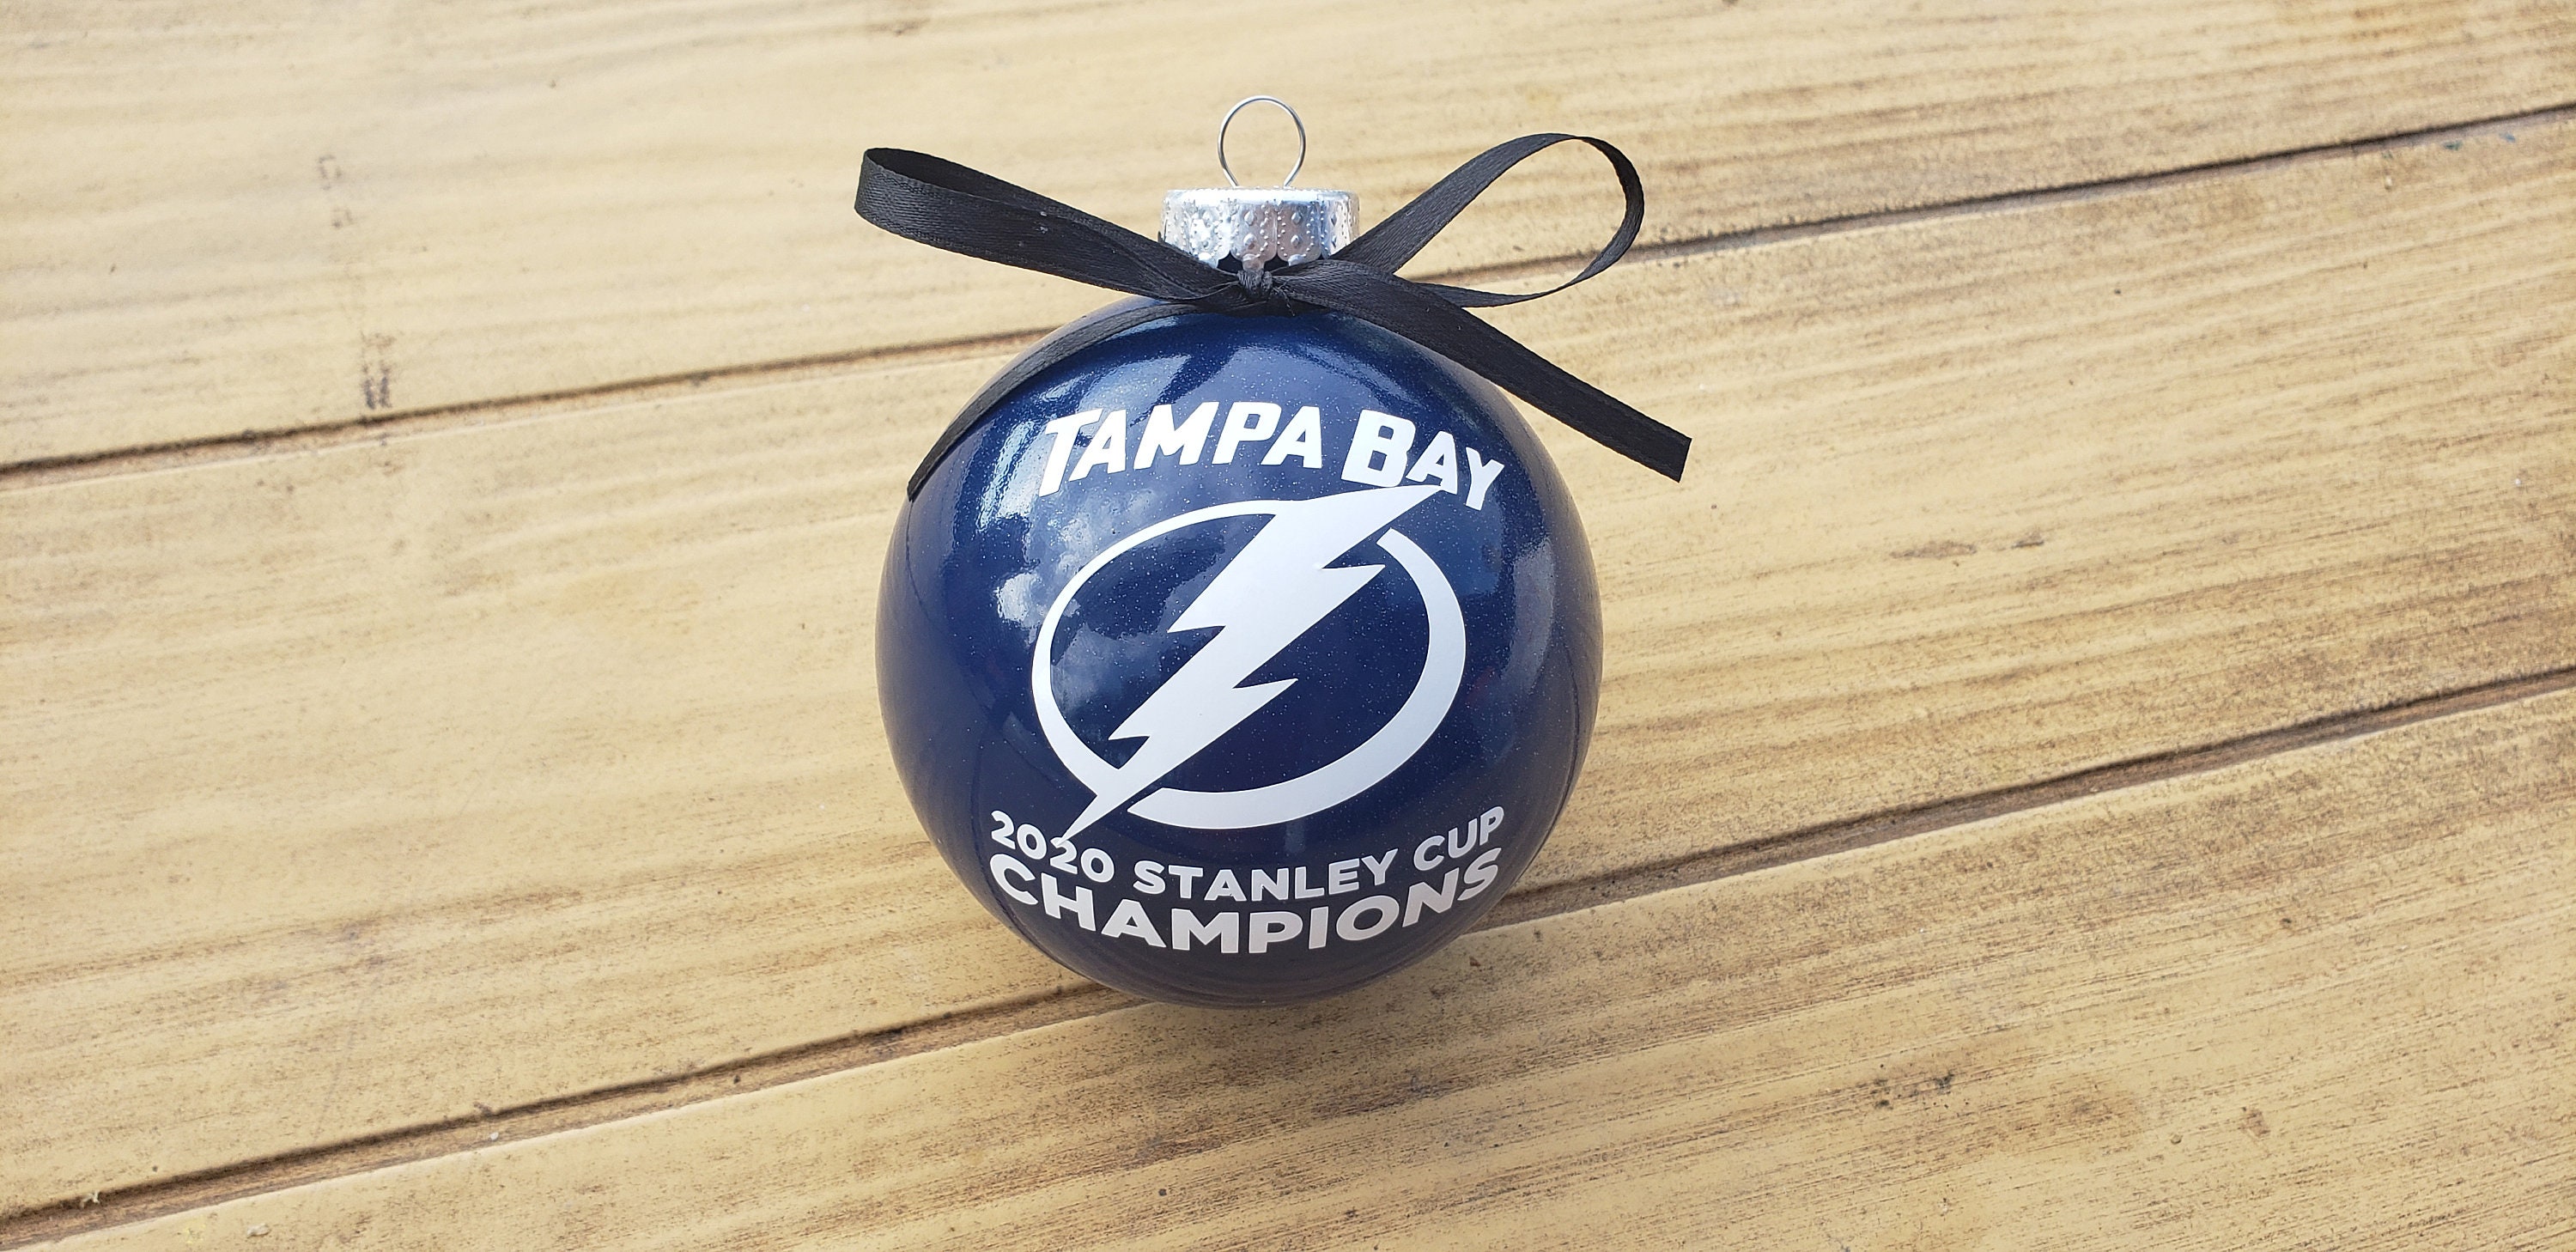 Tampa Bay Lightning NHL 2020 Stanley Cup Champions Glass Ball Ornament